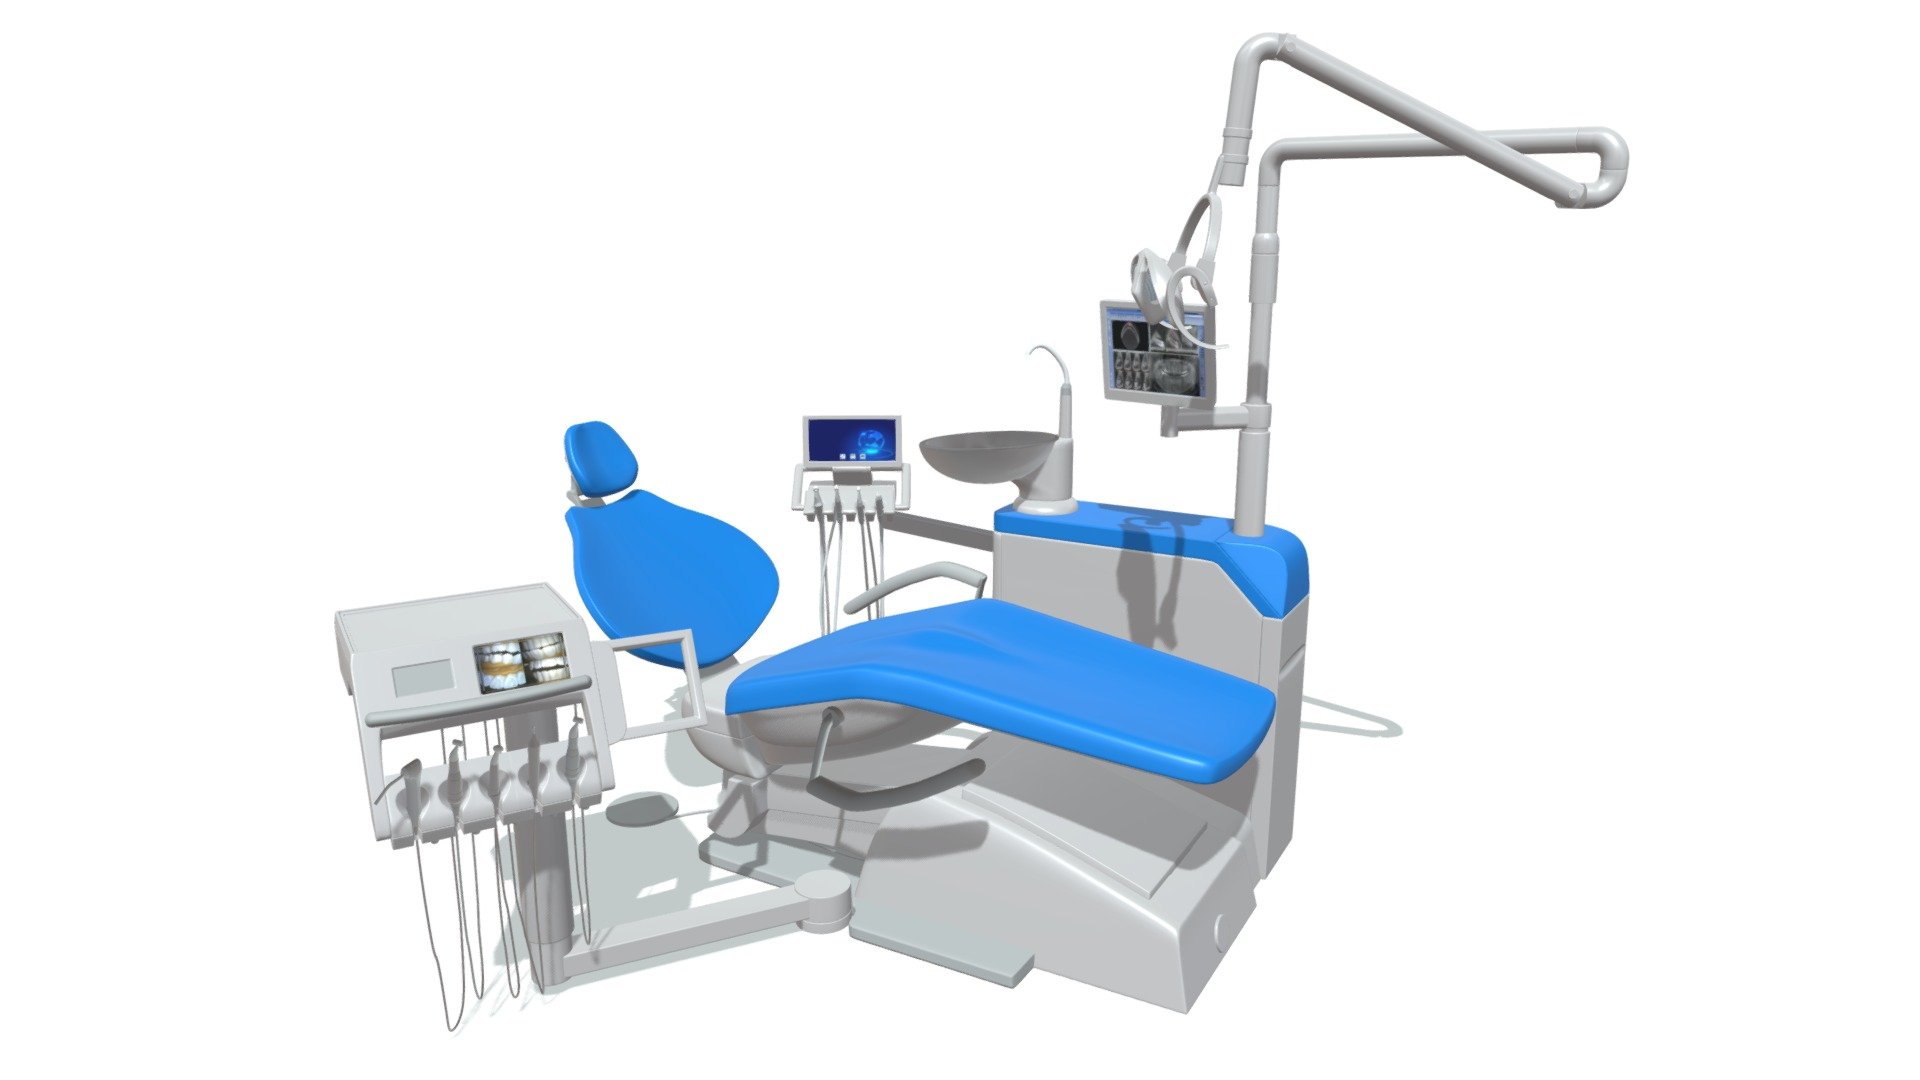 High quality 3d model of dental station with chair 3d model